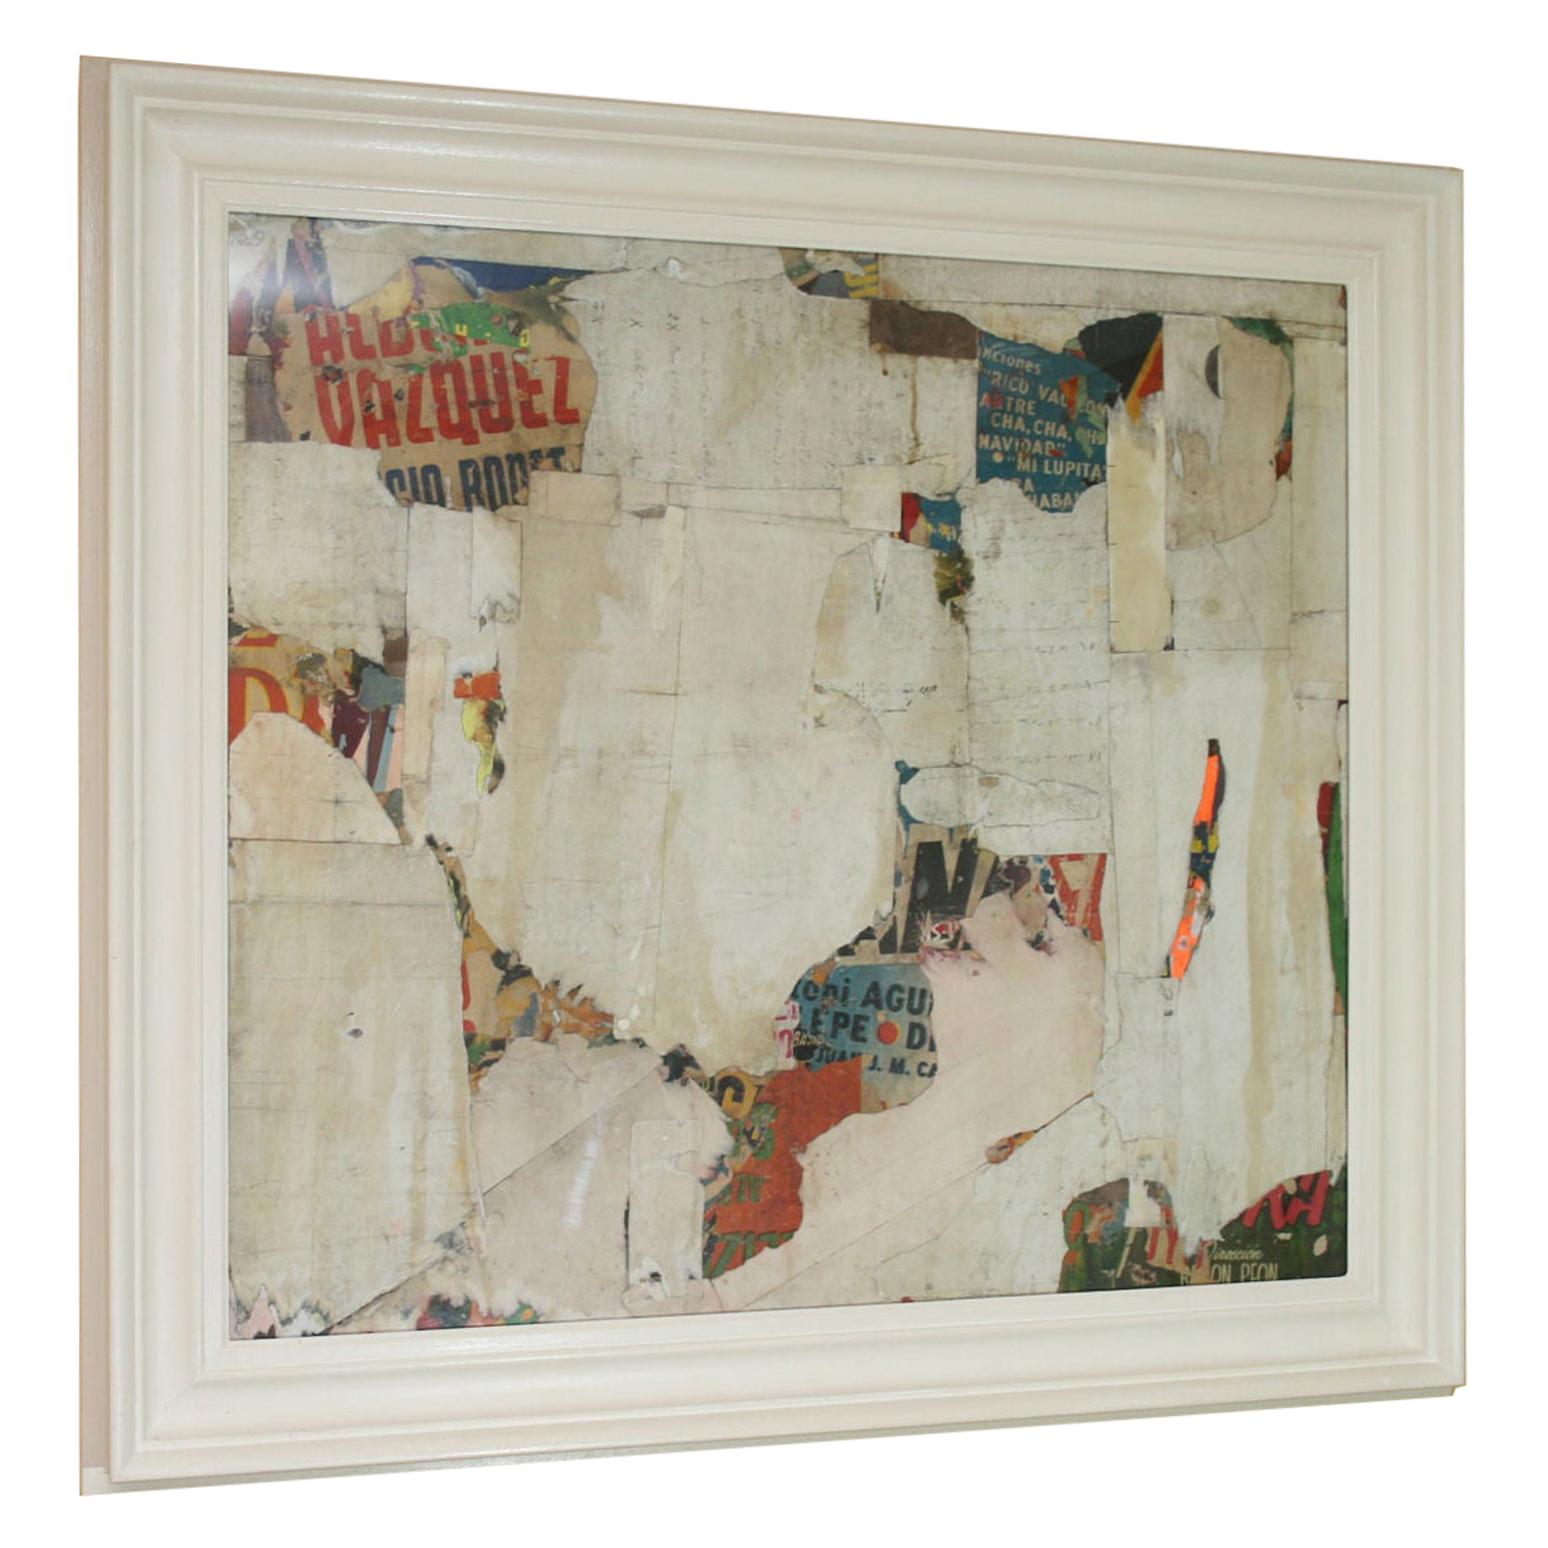 REMNANTS 14 Medium Abstract Collage by Artist Huw Griffith